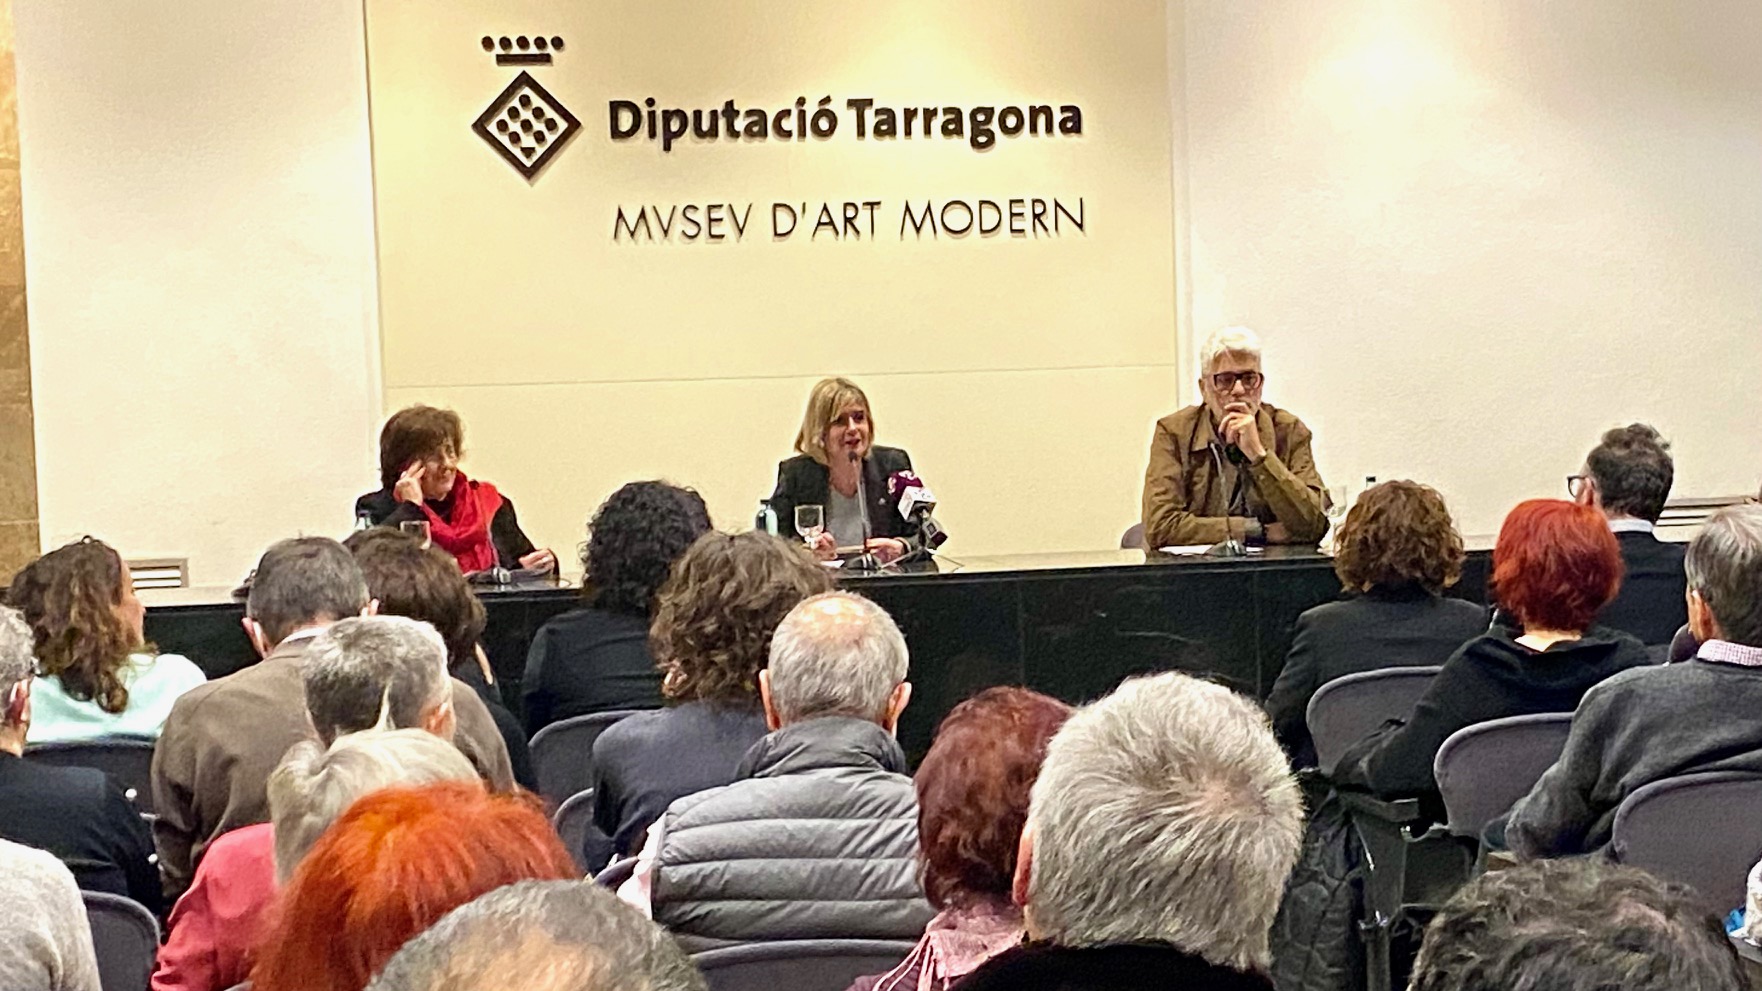 MAMT shows and promotes art made by women in Tarragona